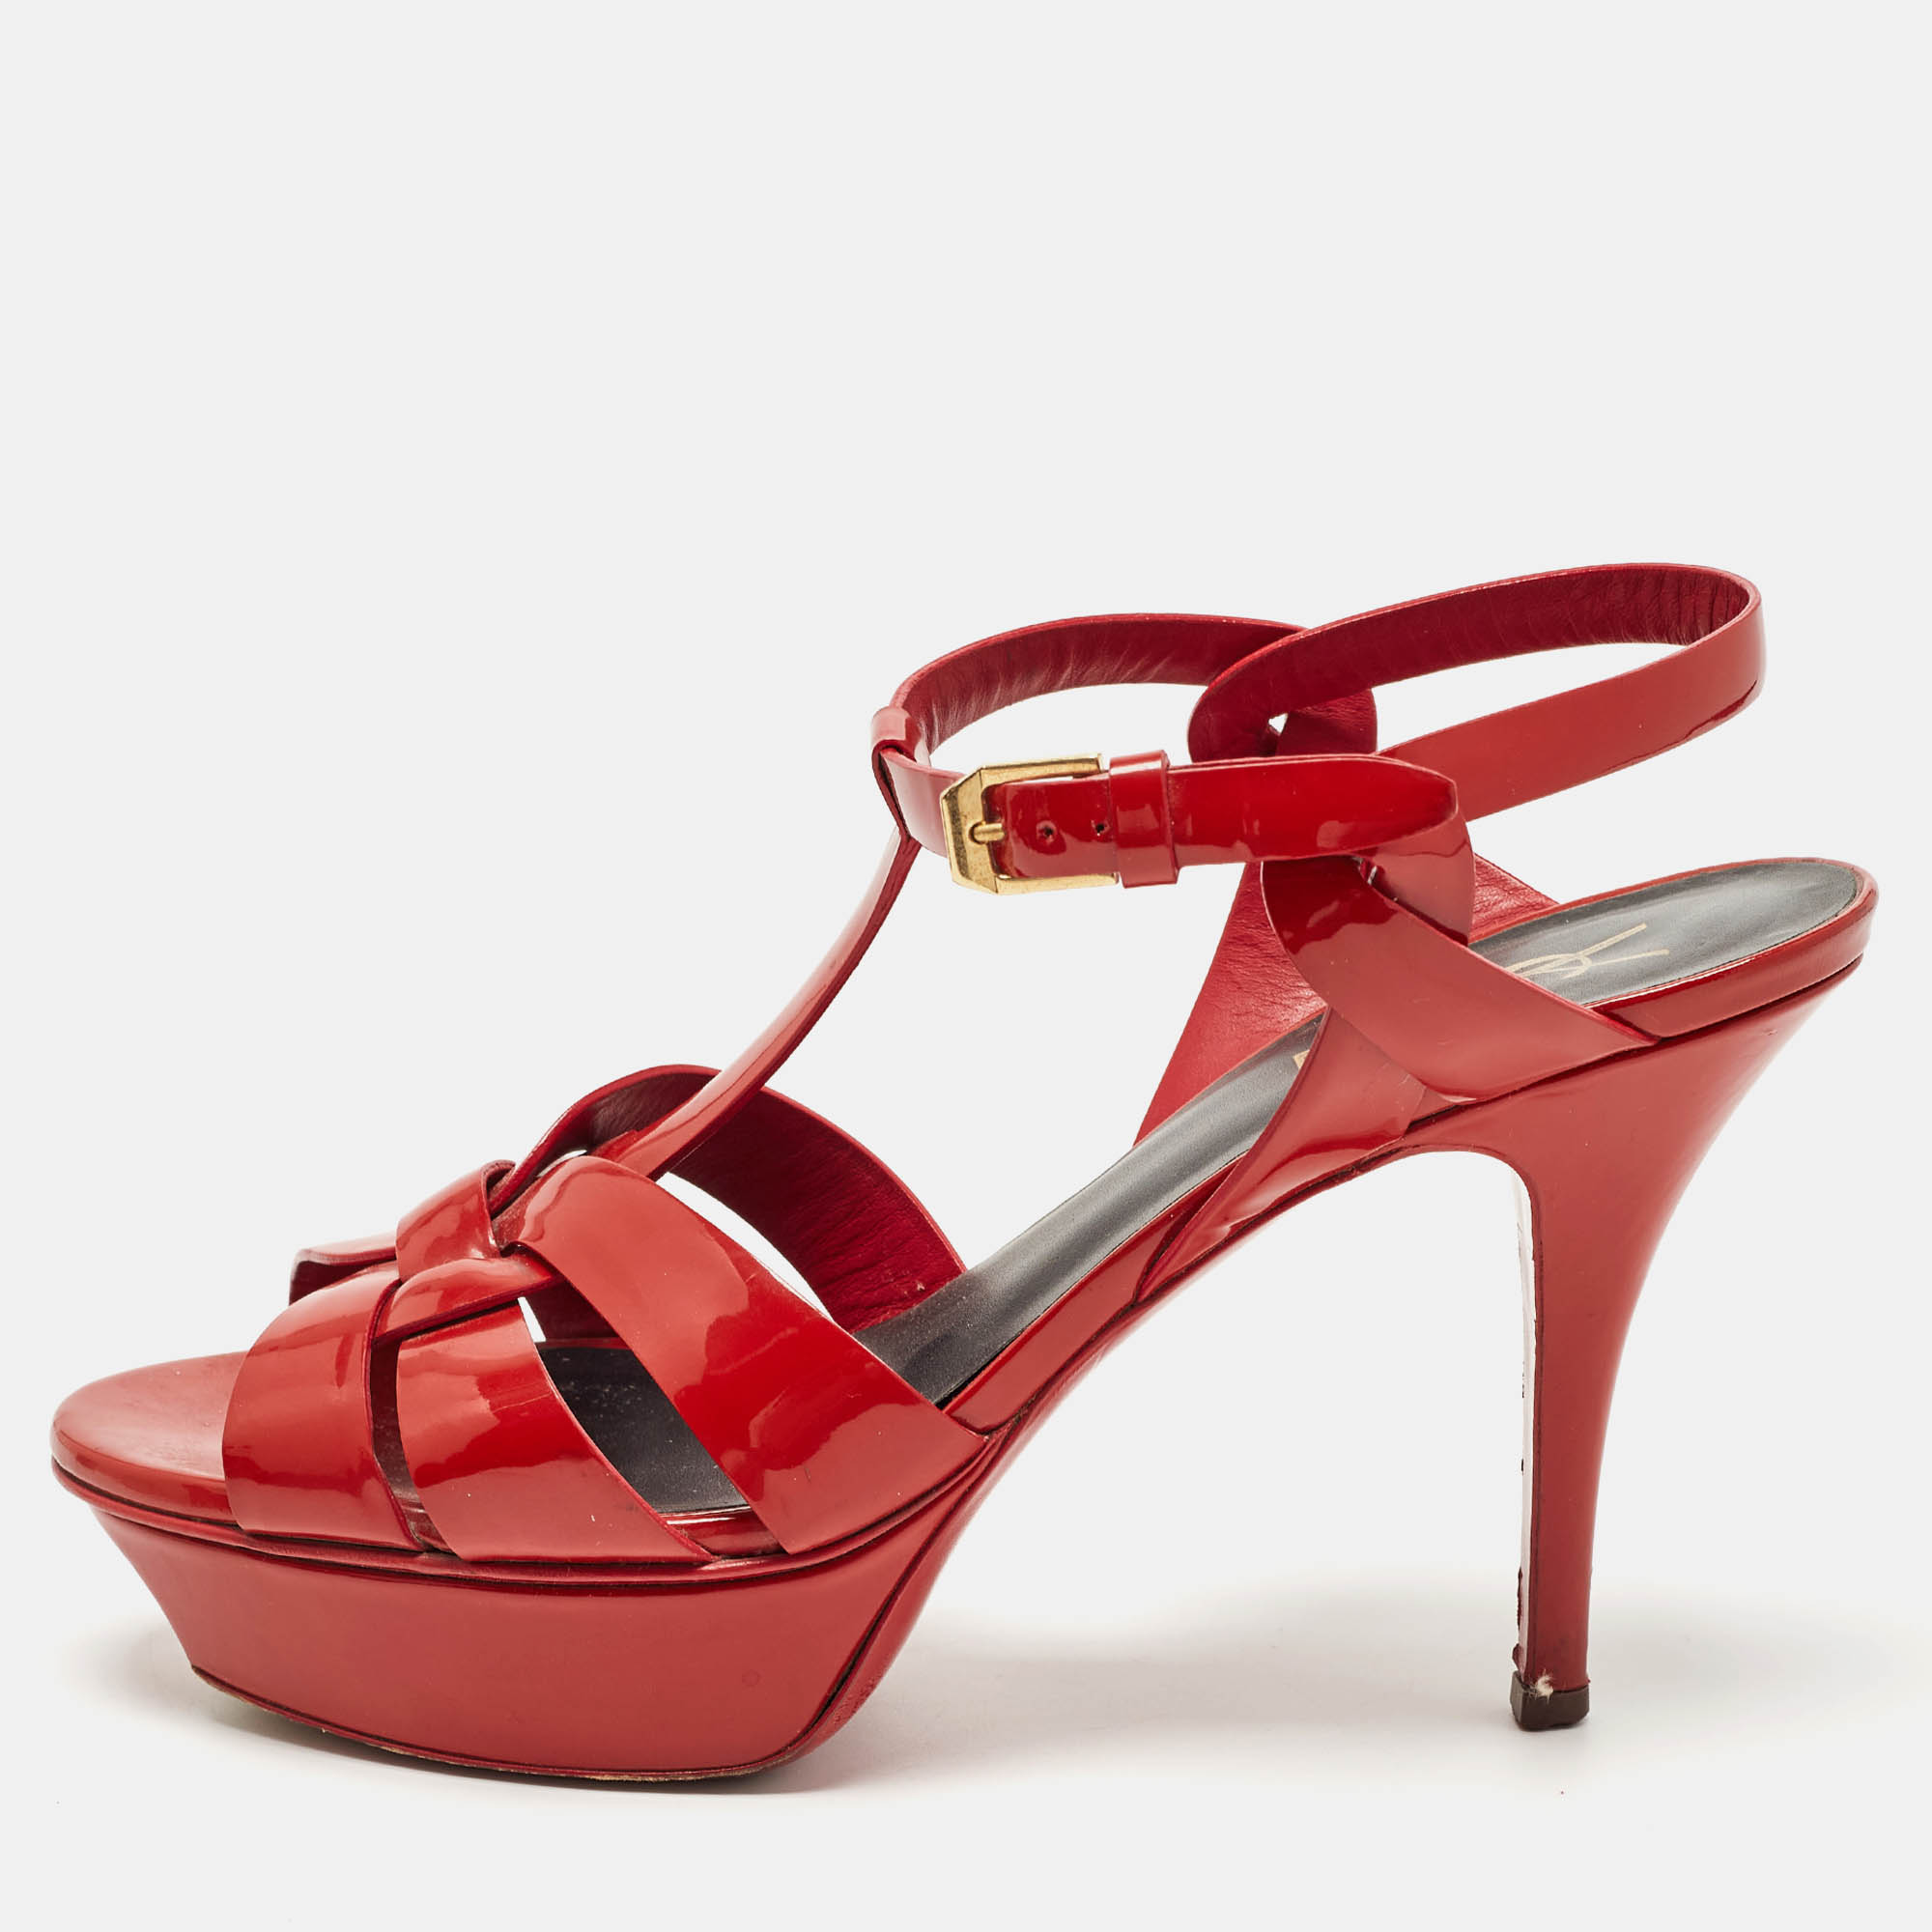 One of the most sought after designs from Saint Laurent is their Tribute sandals. They are such a craze amongst fashionistas around the world and it is time you own one yourself. These red ones are designed with leather straps ankle buckle closures and durable soles.